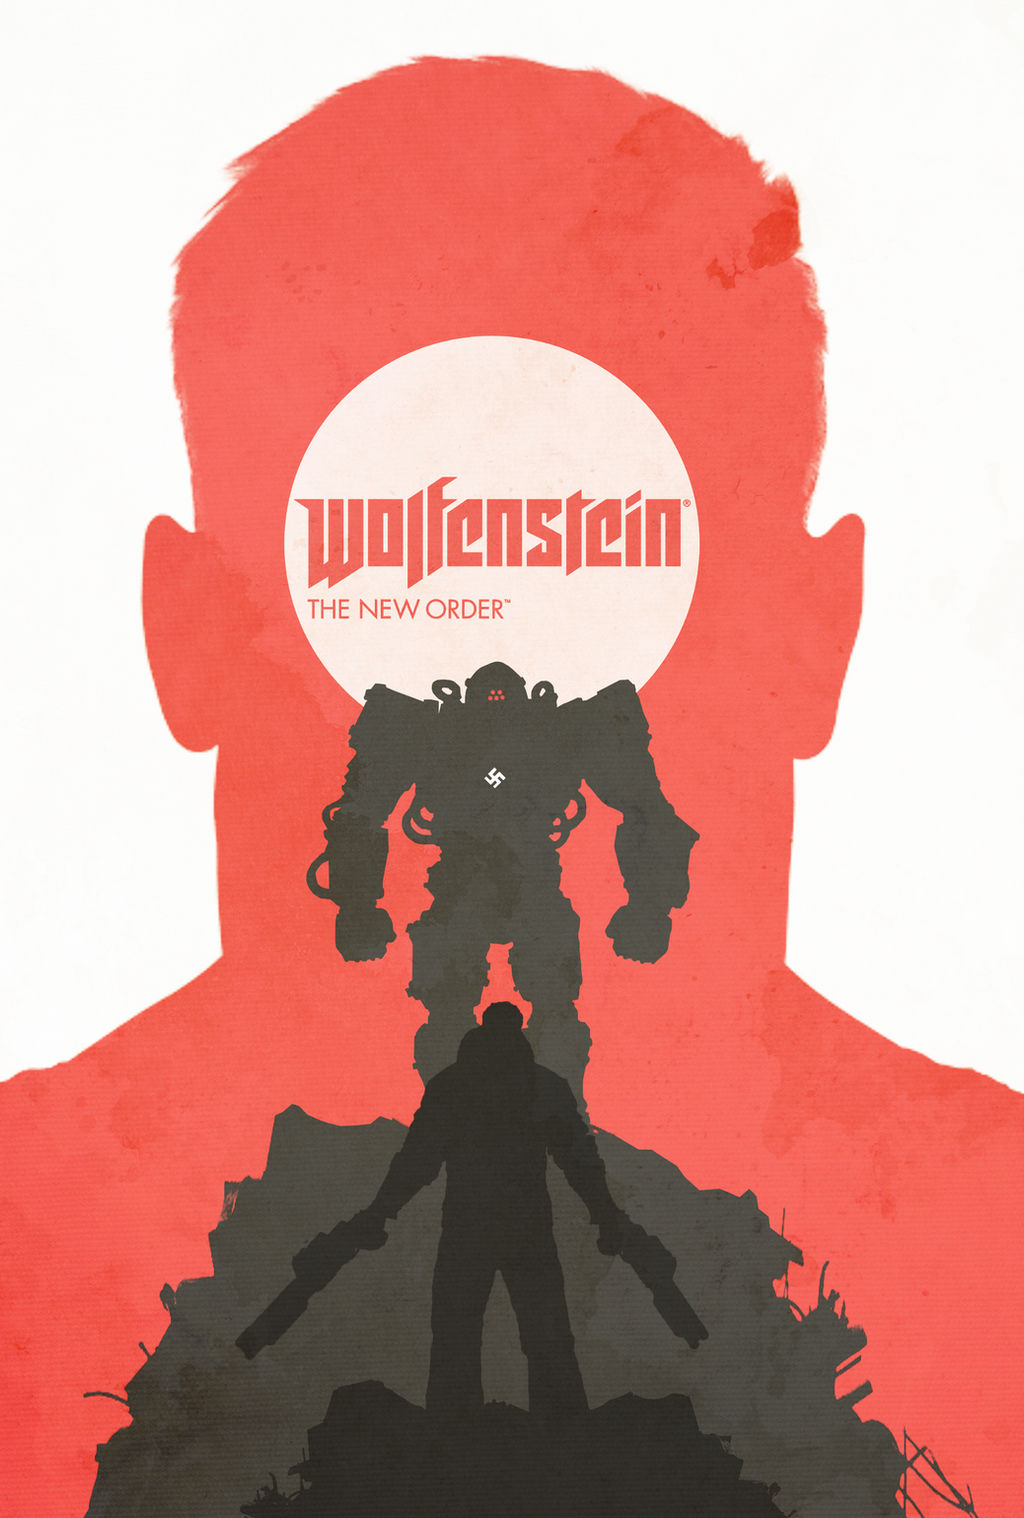 Hungry like the wolf: Wolfenstein New Order Technobubble review